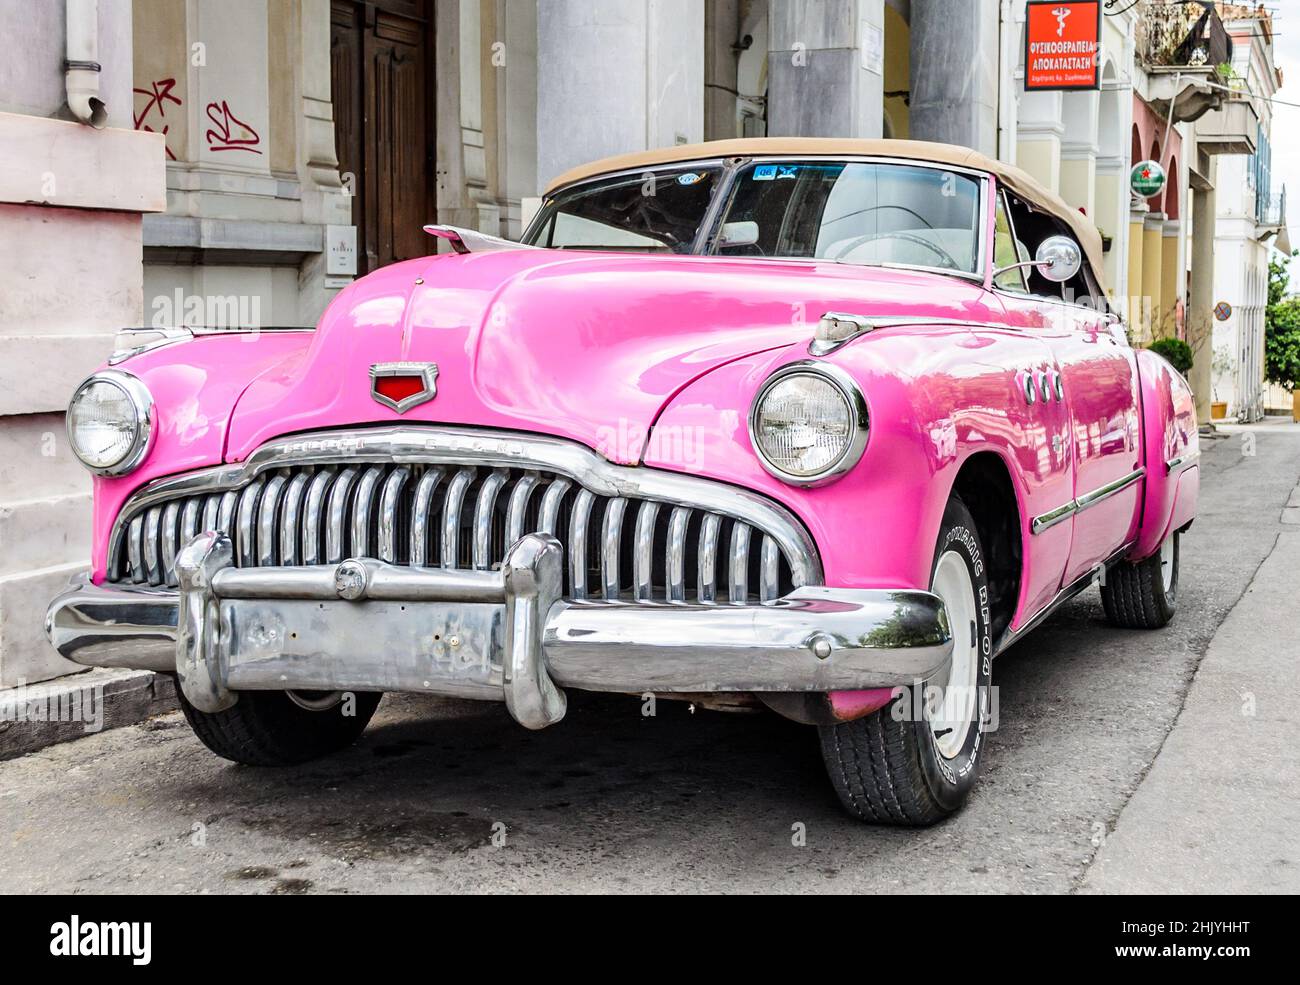 Pink Vintage Antique Car. Rare Buick Super Convertible Sedan Parked Aside the Road in Patras Greece Stock Photo